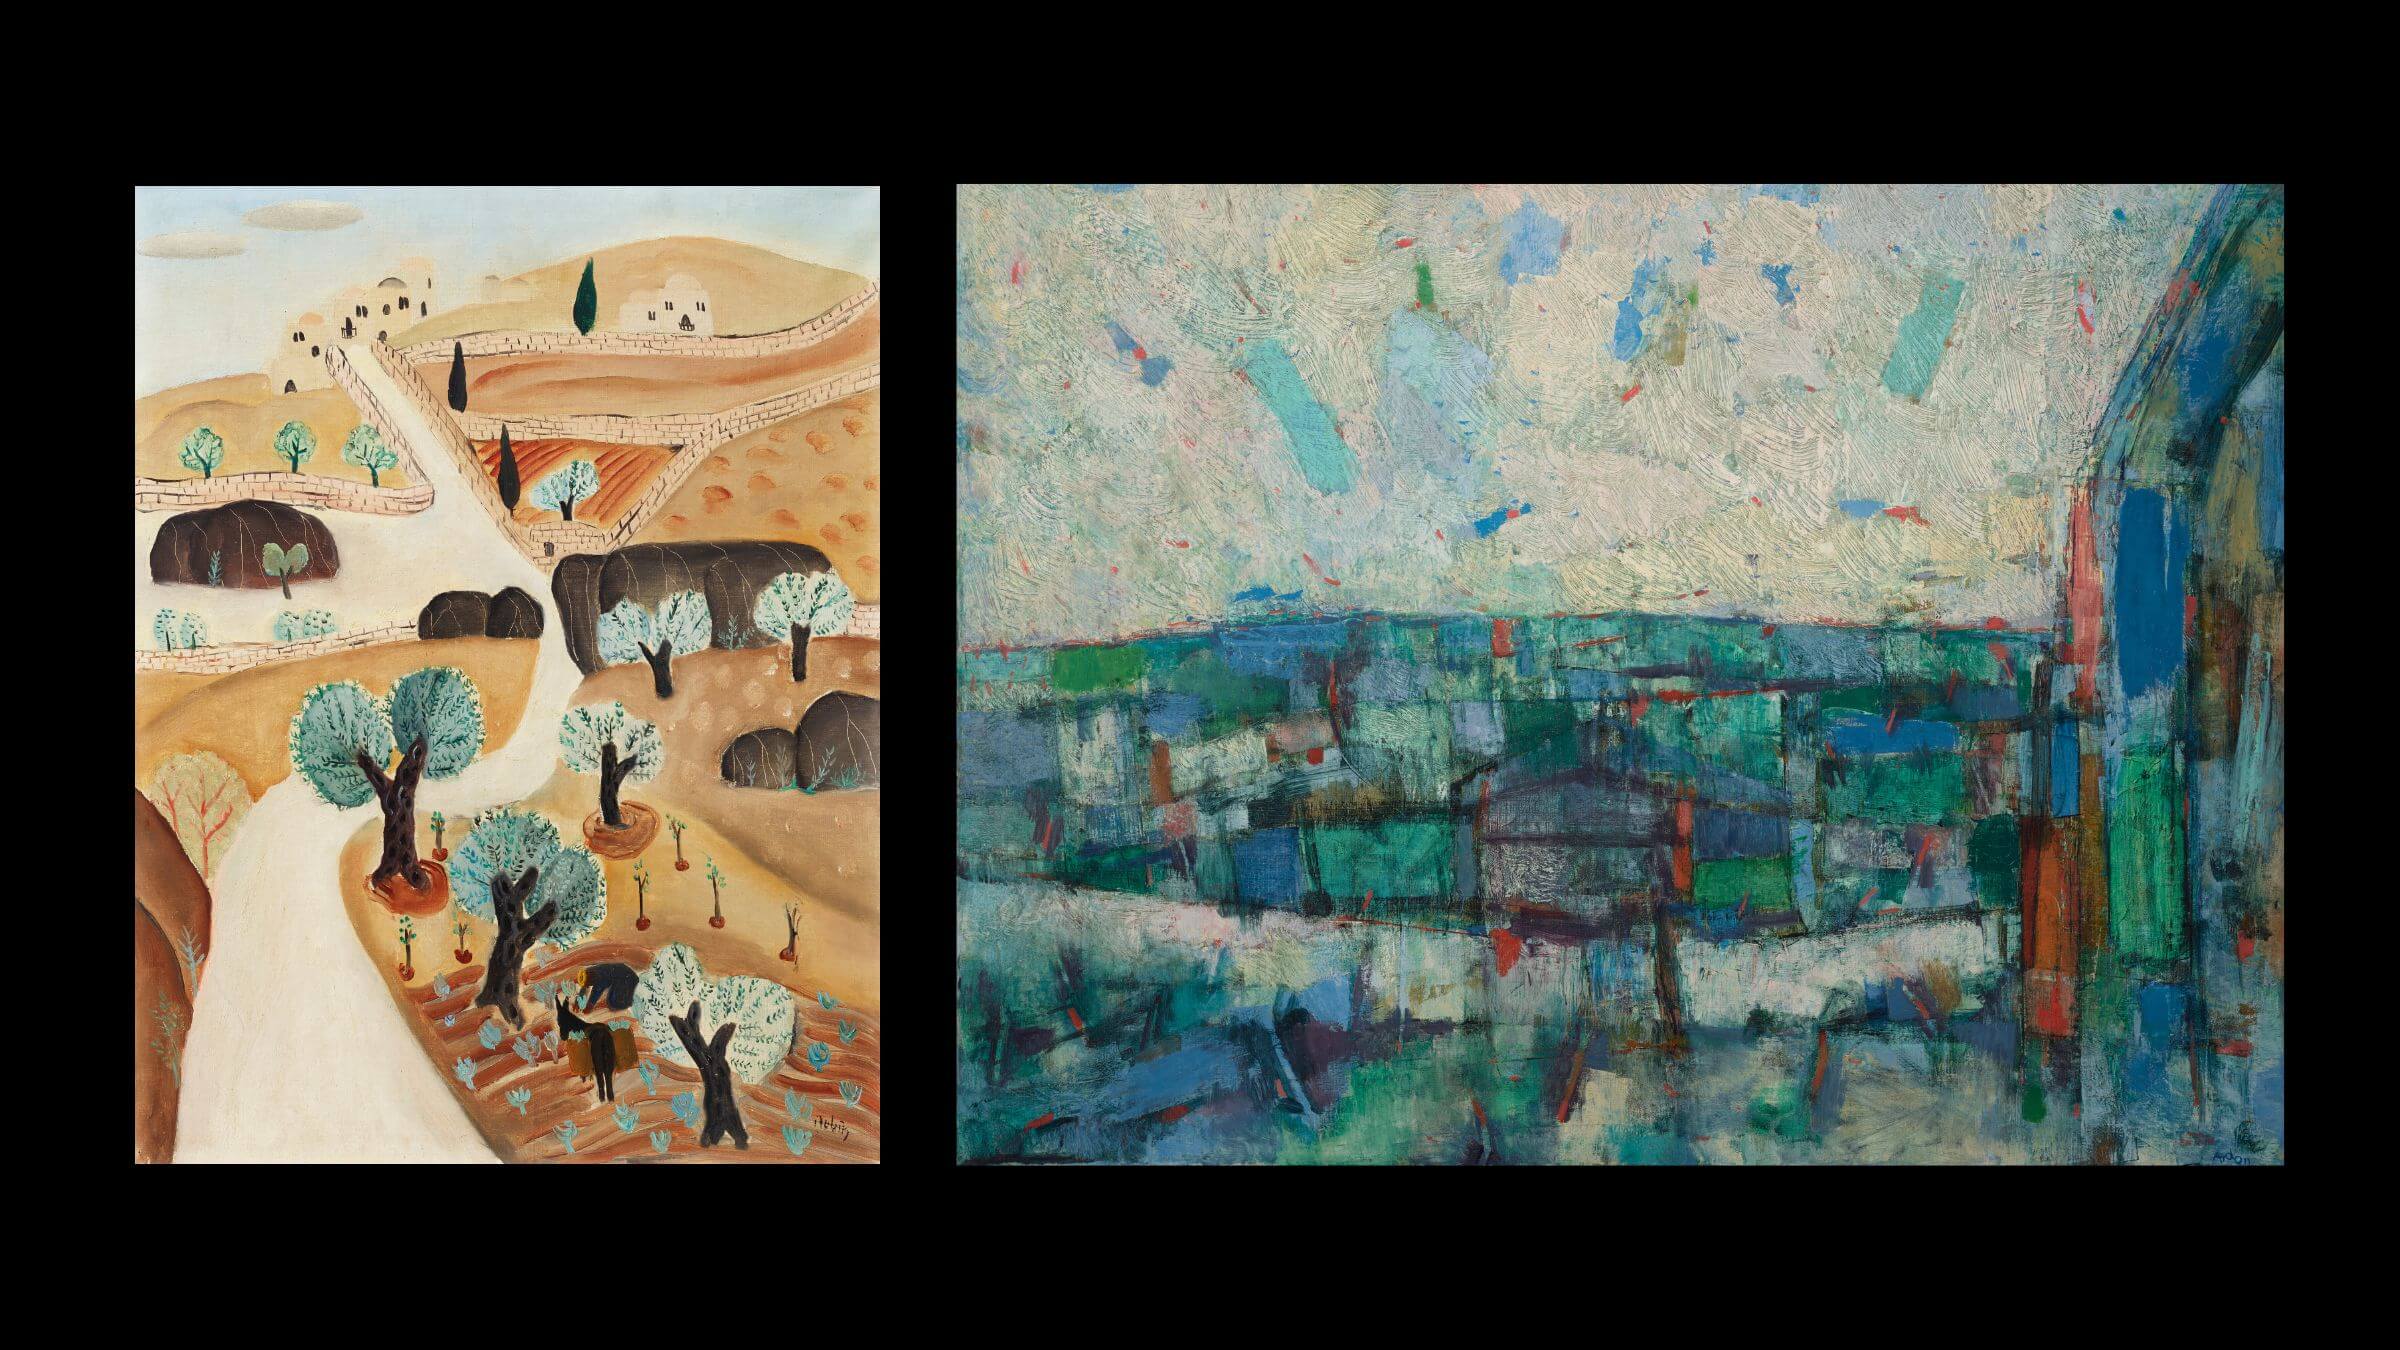 From left, Reuven Rubin’s <i>Olive Trees in the Galilee</i>, and  Mordechai Ardon’s <i>A View of the Western Wall</i>, are on view at Christie's auction house in New York through March 1 as part of an exhibition of Israeli art never before shown outside the country.